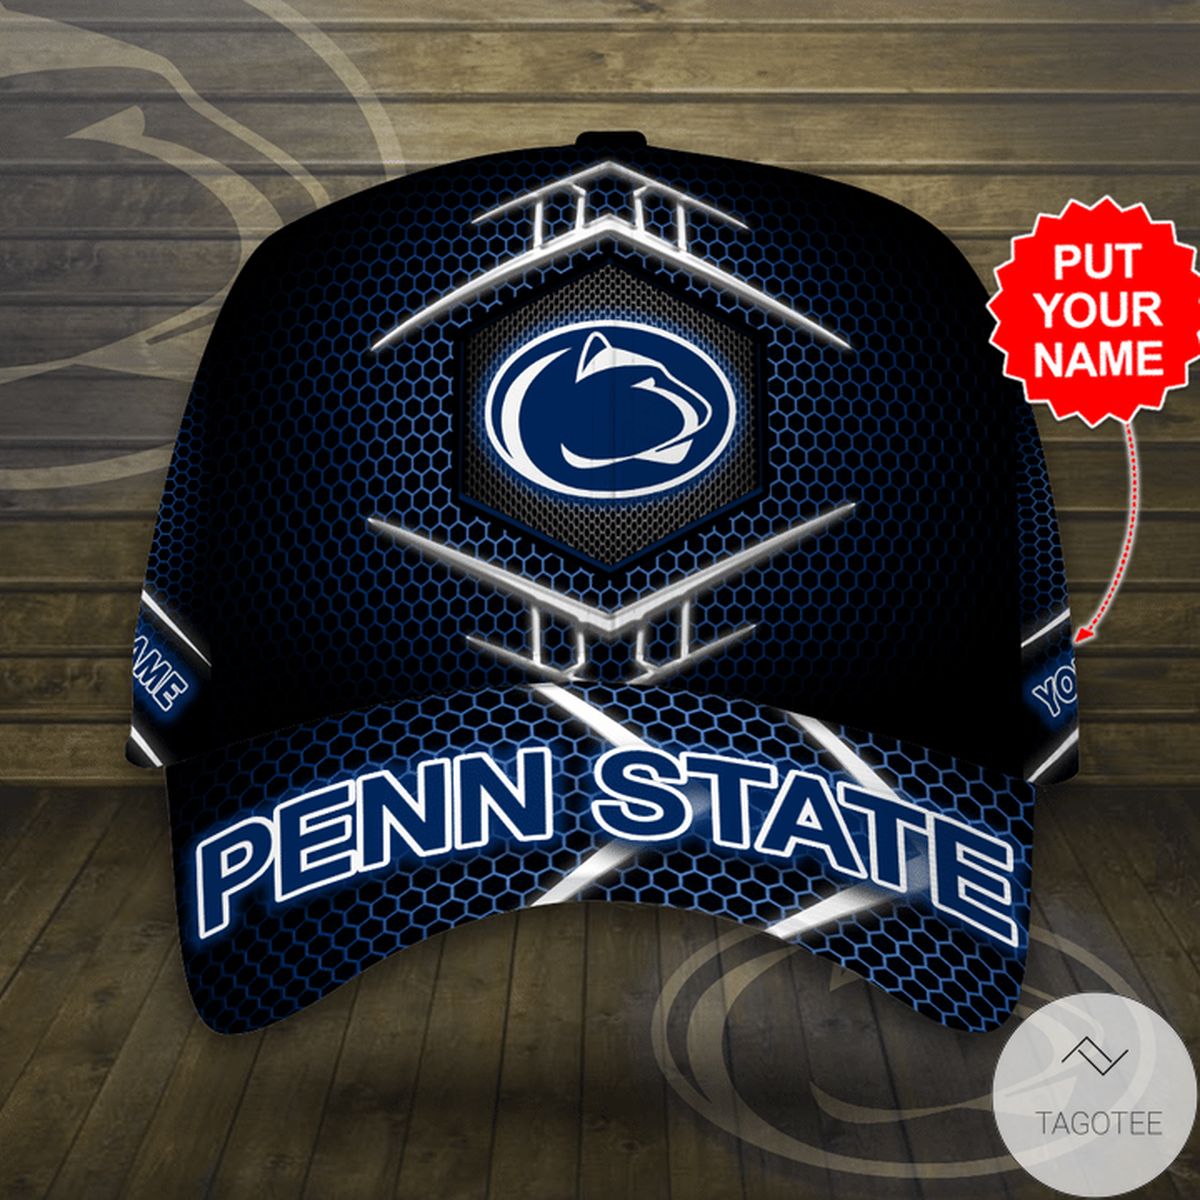 Personalized Penn State Cap